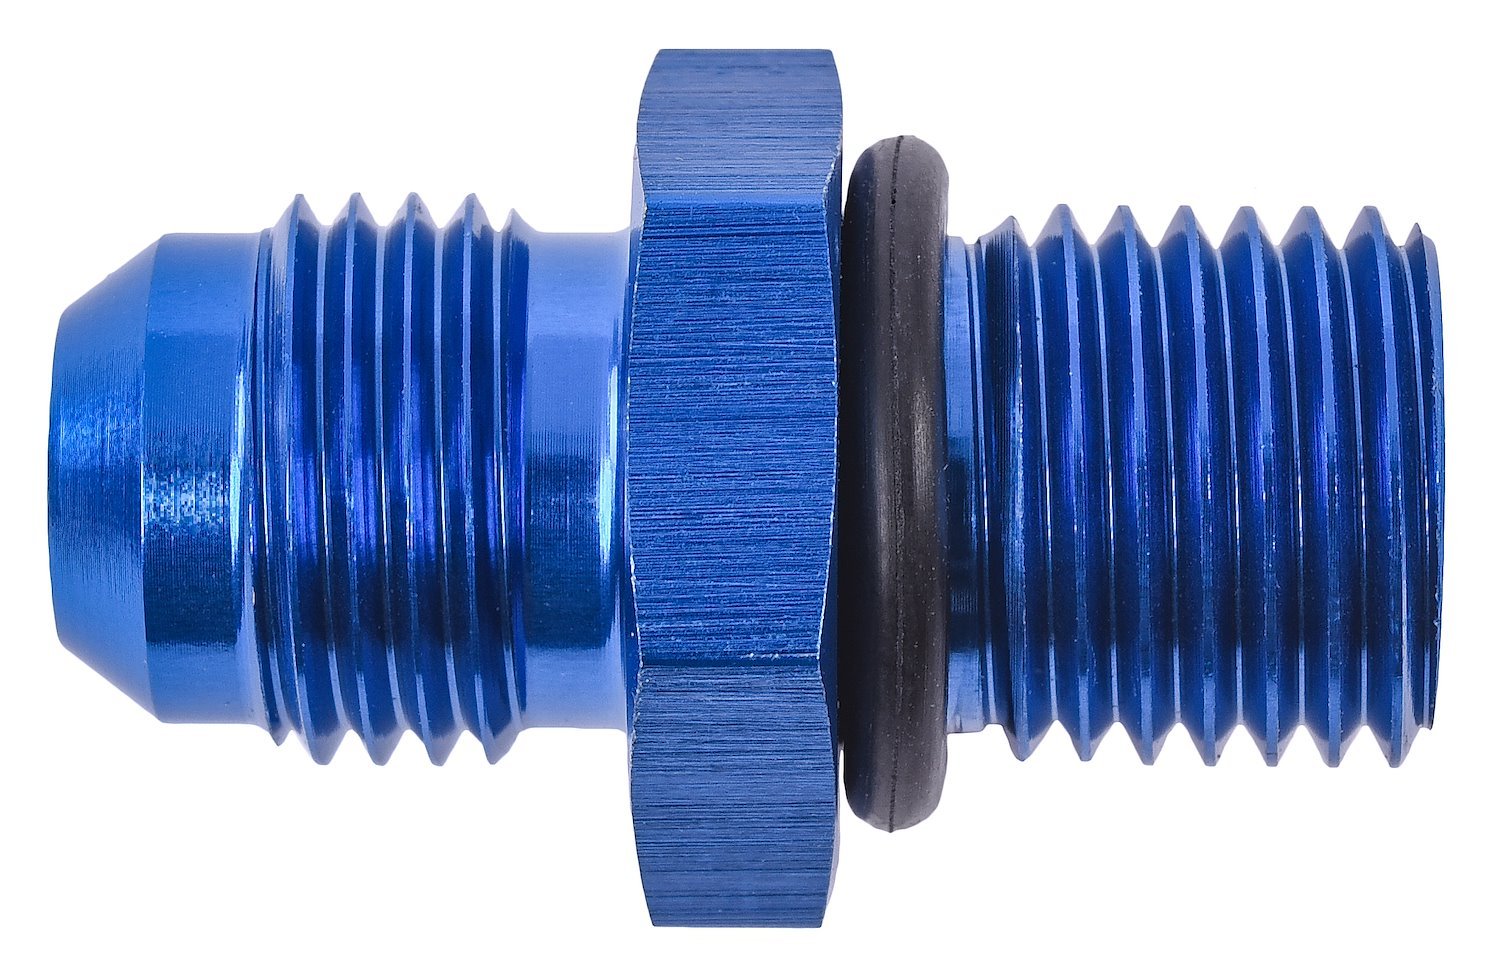 AN Port Adapter Fitting [Metric O-Ring Port (14mm x 1.5 Thread) To -6 AN Male, Blue]